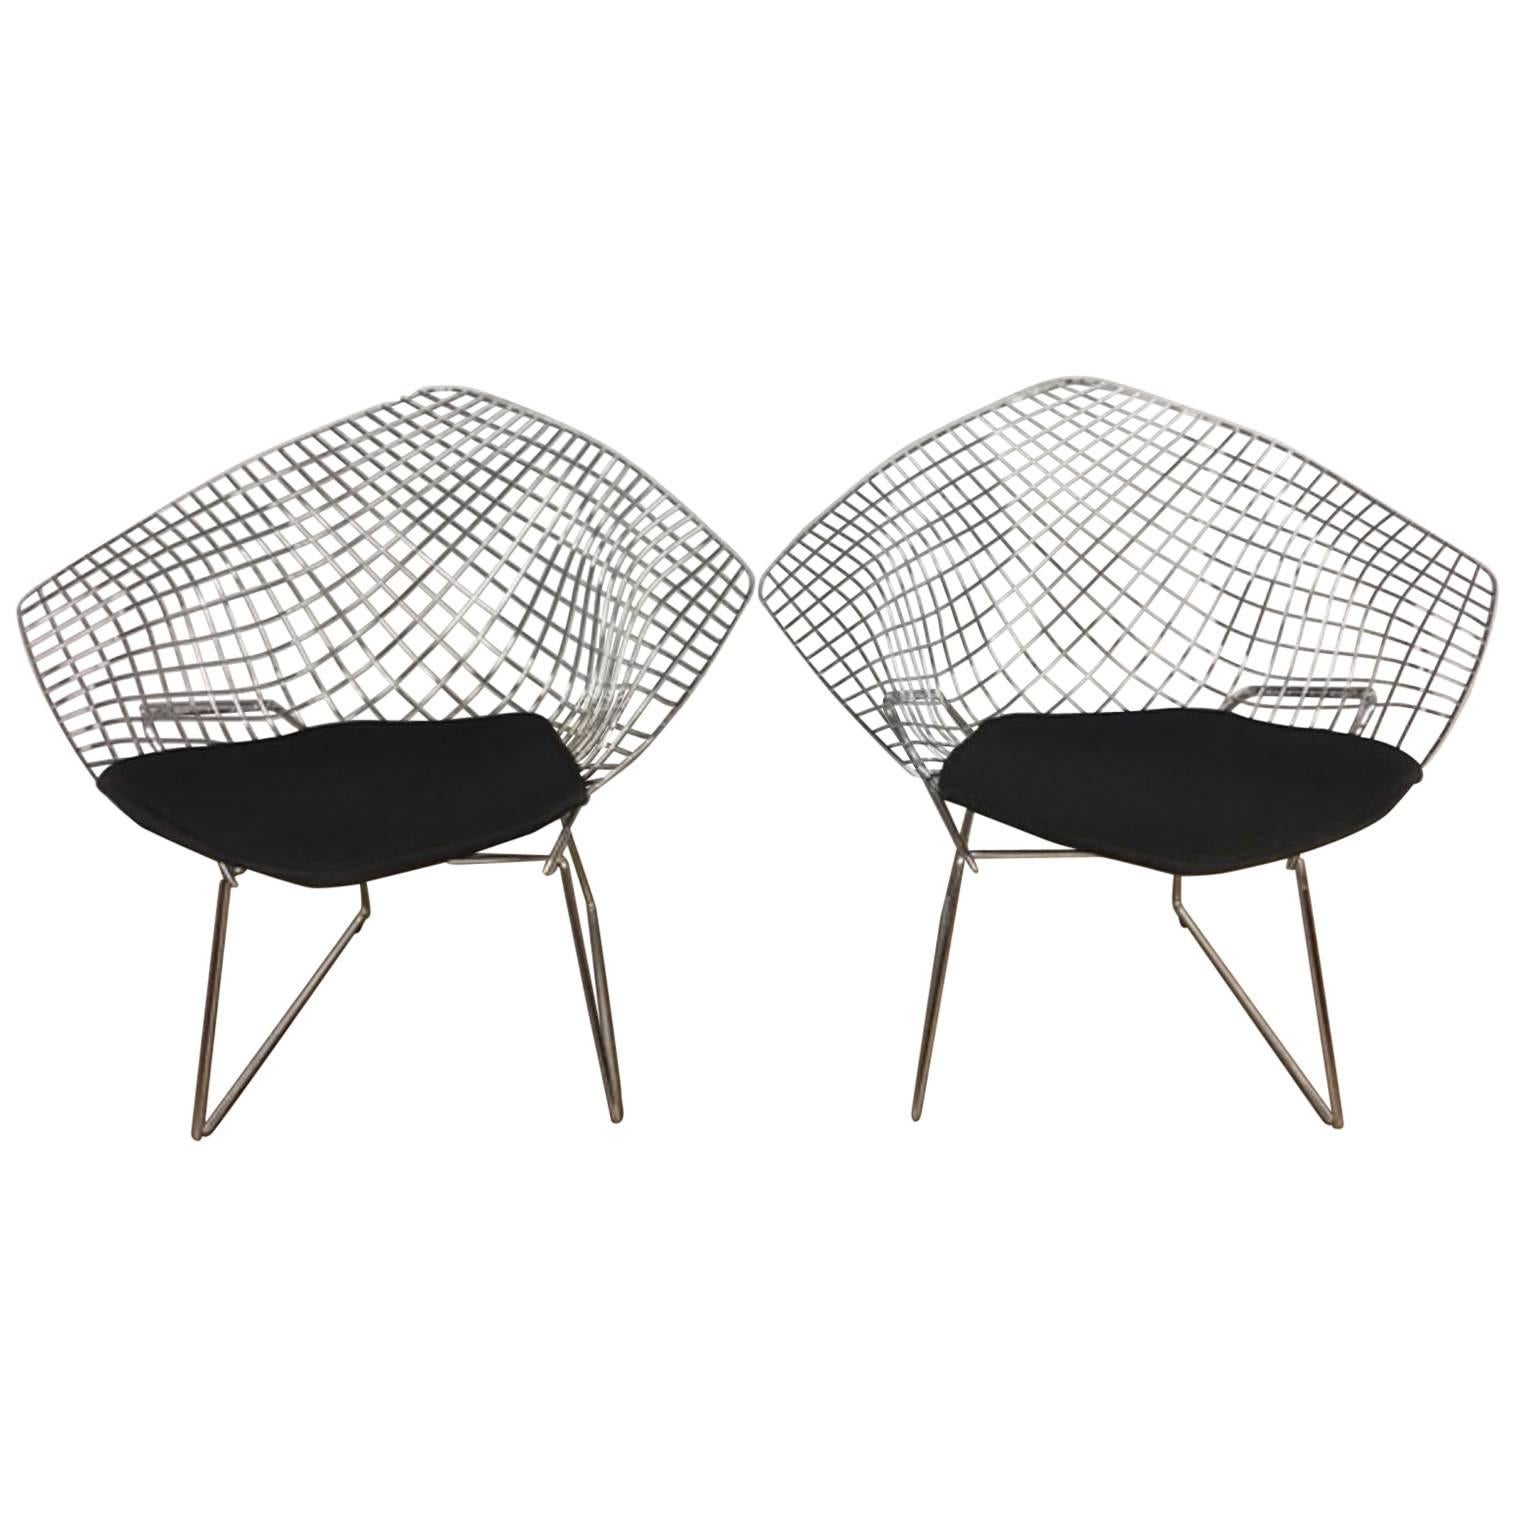 Bertoia Diamond Chairs with Black Wool Pads by Knoll